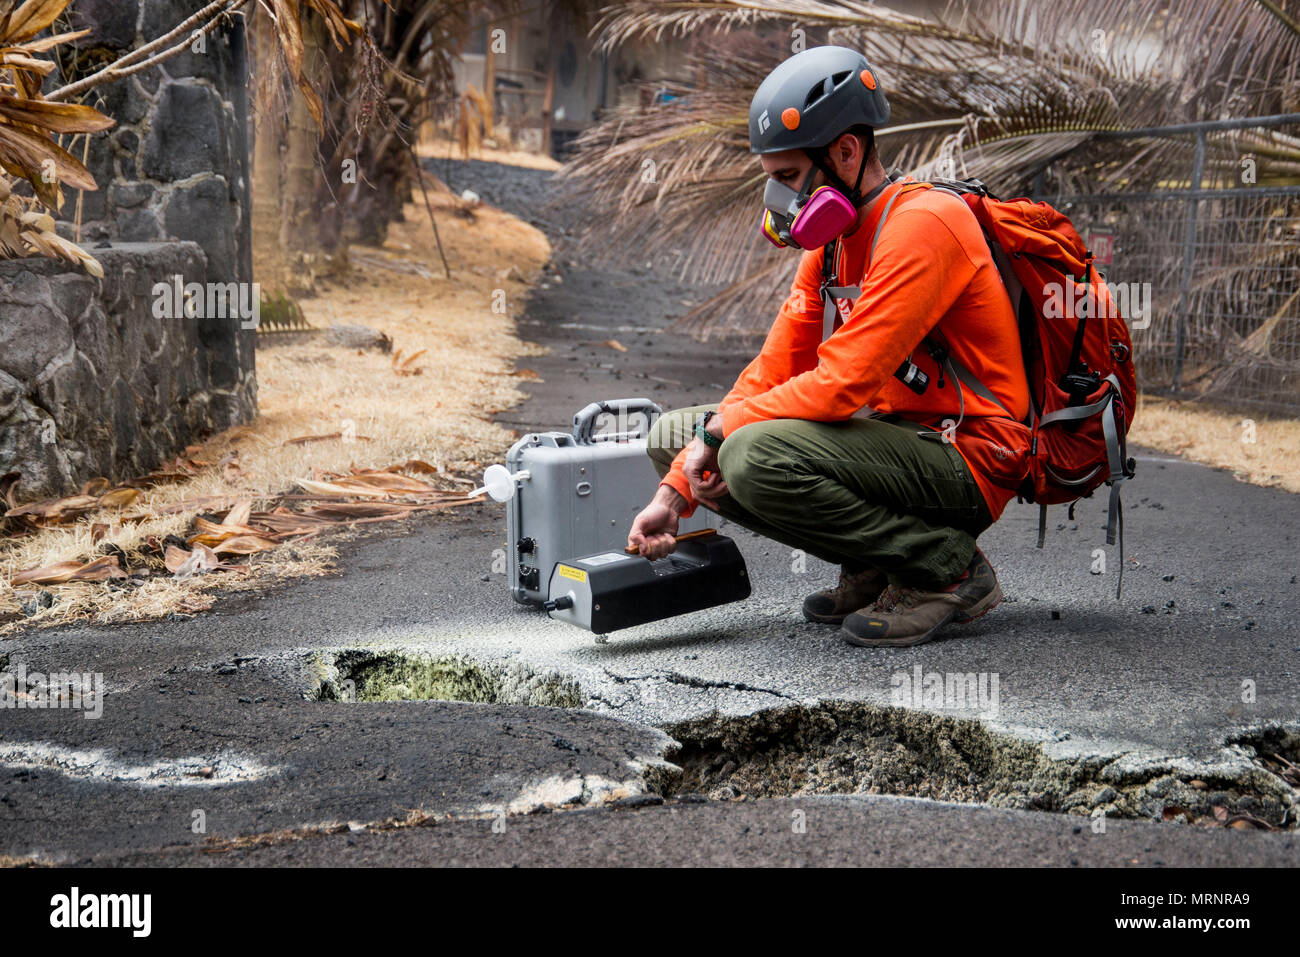 A U.S. Geological Survey volunteer uses a sulfur dioxide sensor to test the air quality in the Leilani Estates during the eruption of the Kilauea volcano May 19, 2018 in Pahoa, Hawaii. Stock Photo